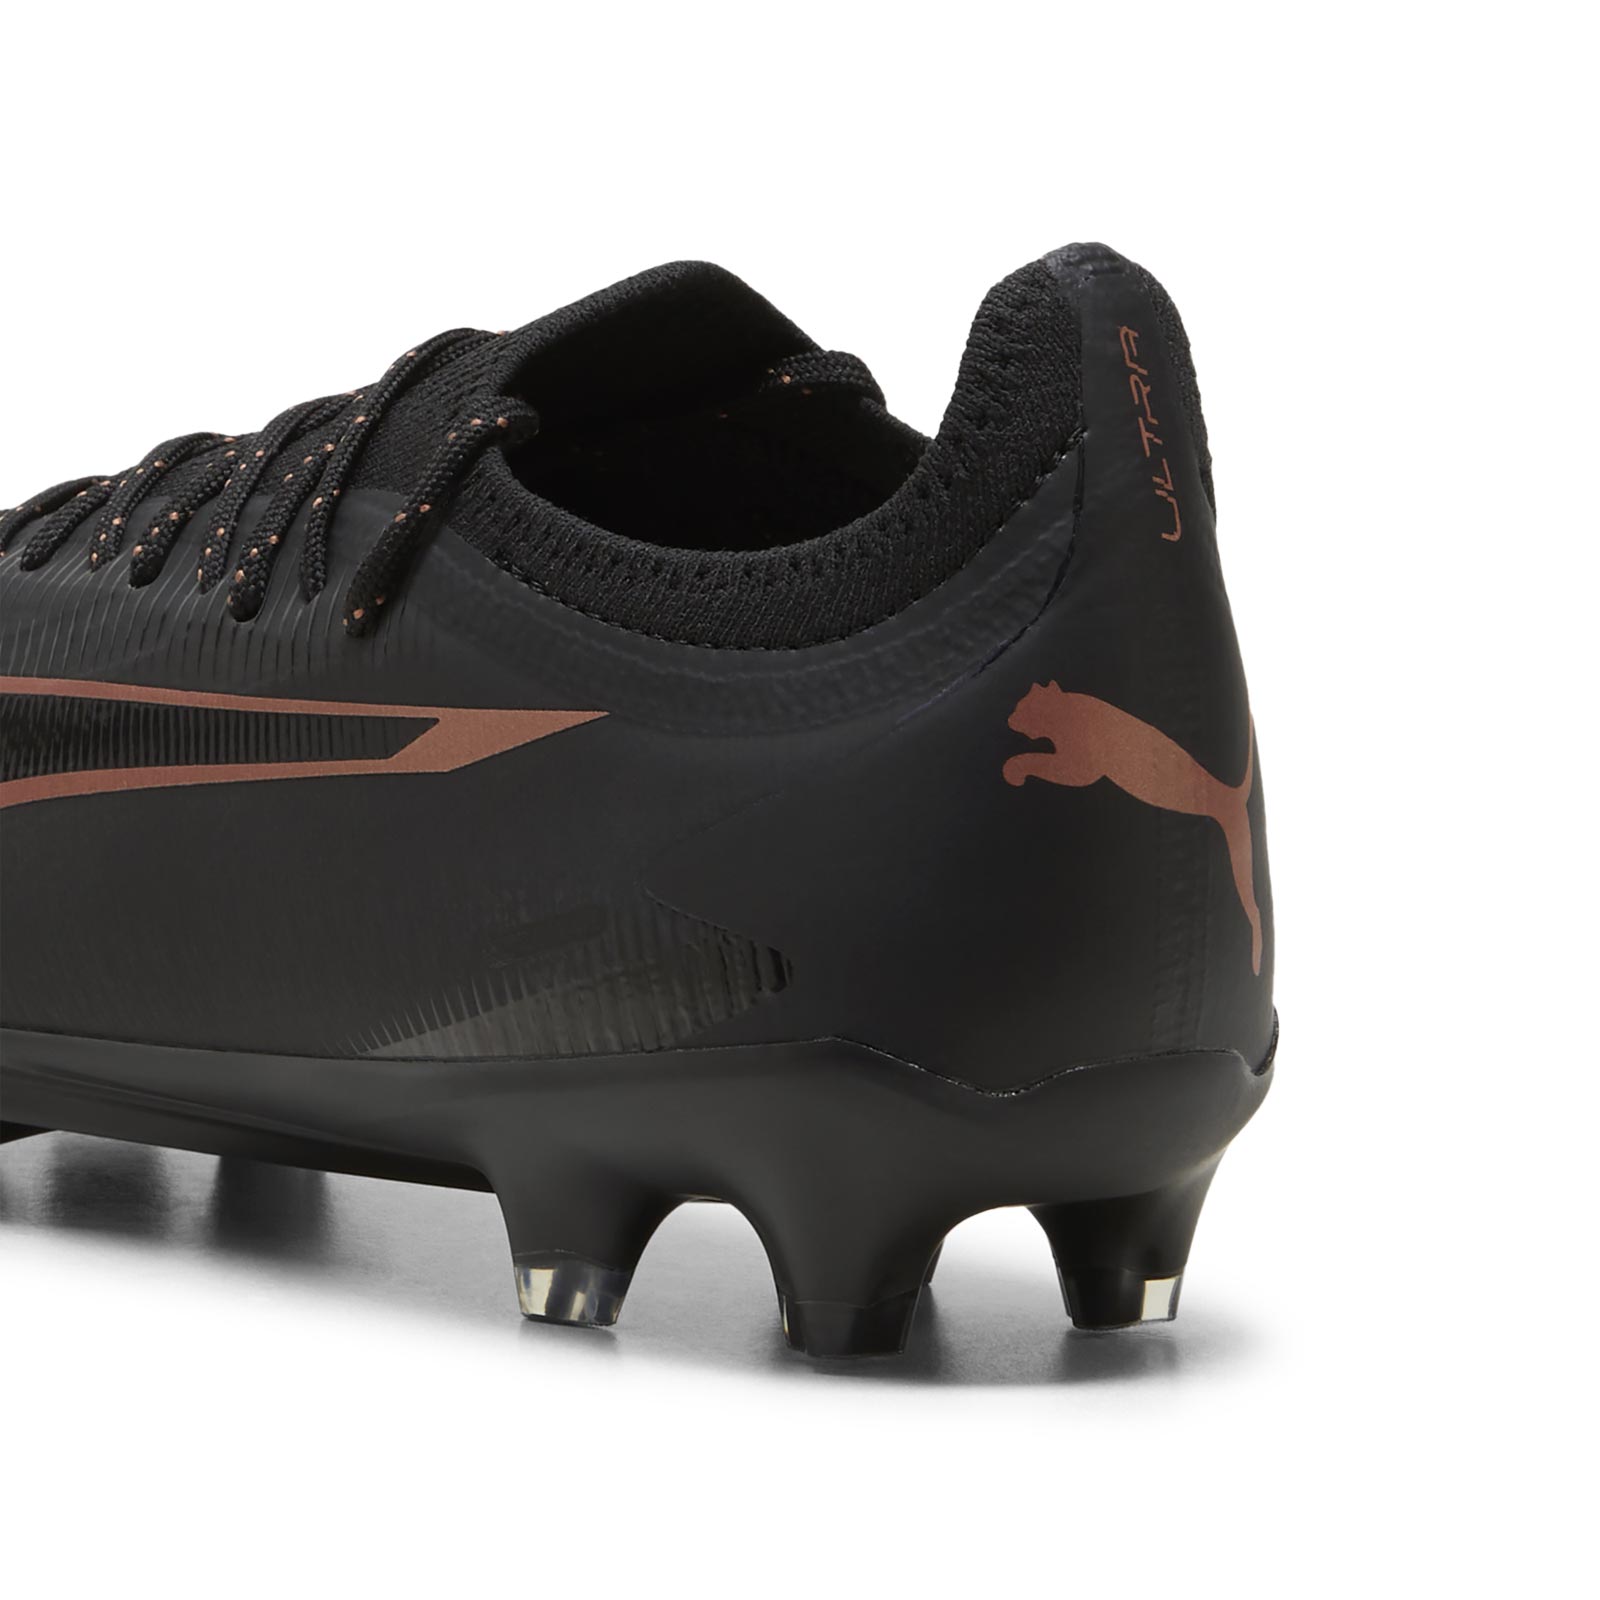 PUMA ULTRA ULTIMATE FIRM-GROUND FOOTBALL BOOTS